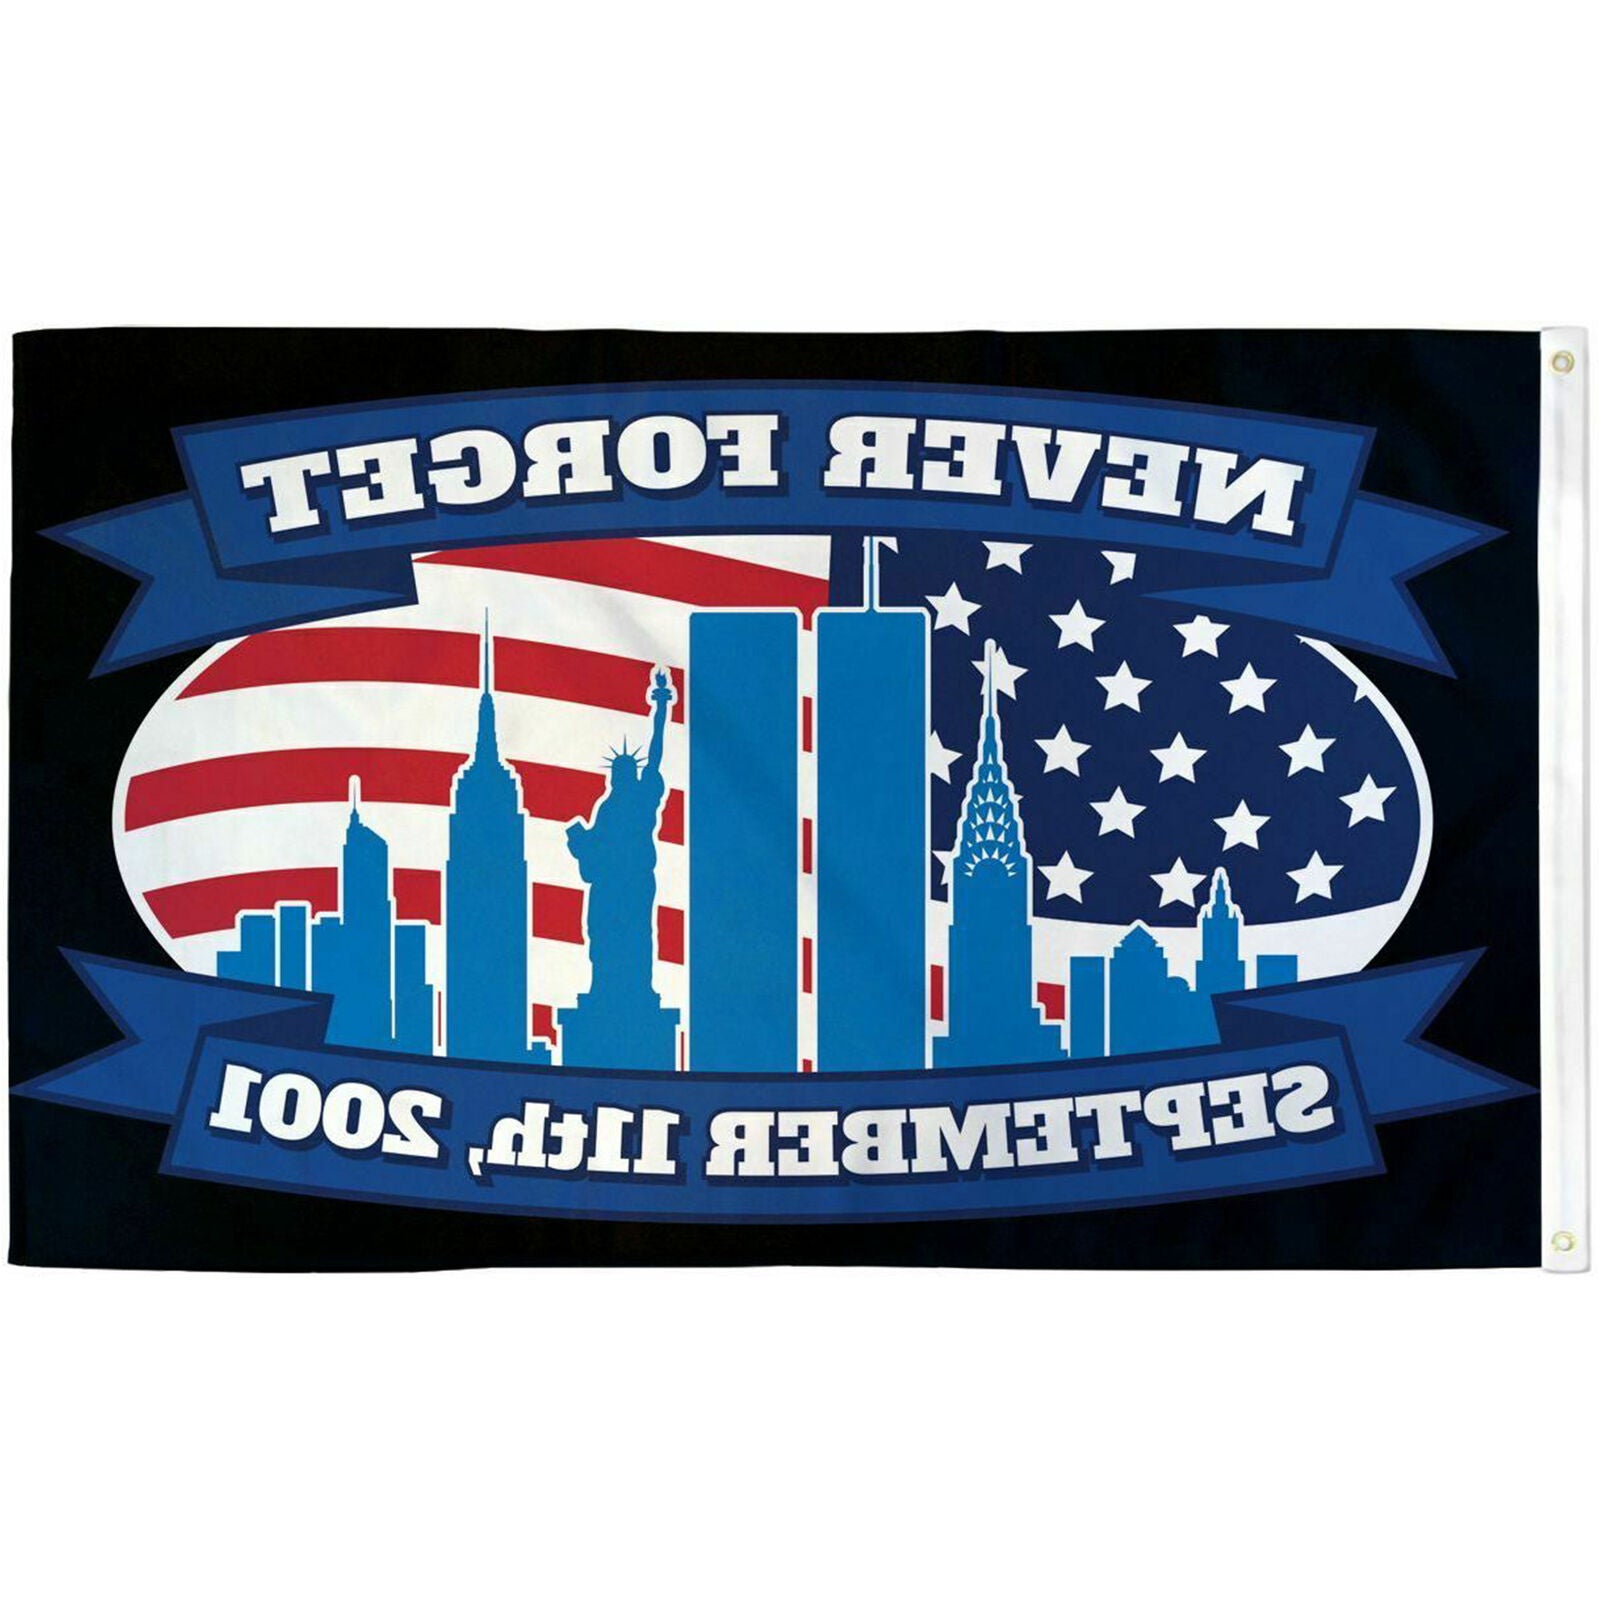 "9/11 NEVER FORGET (USA)" flag 3x5 ft poly banner